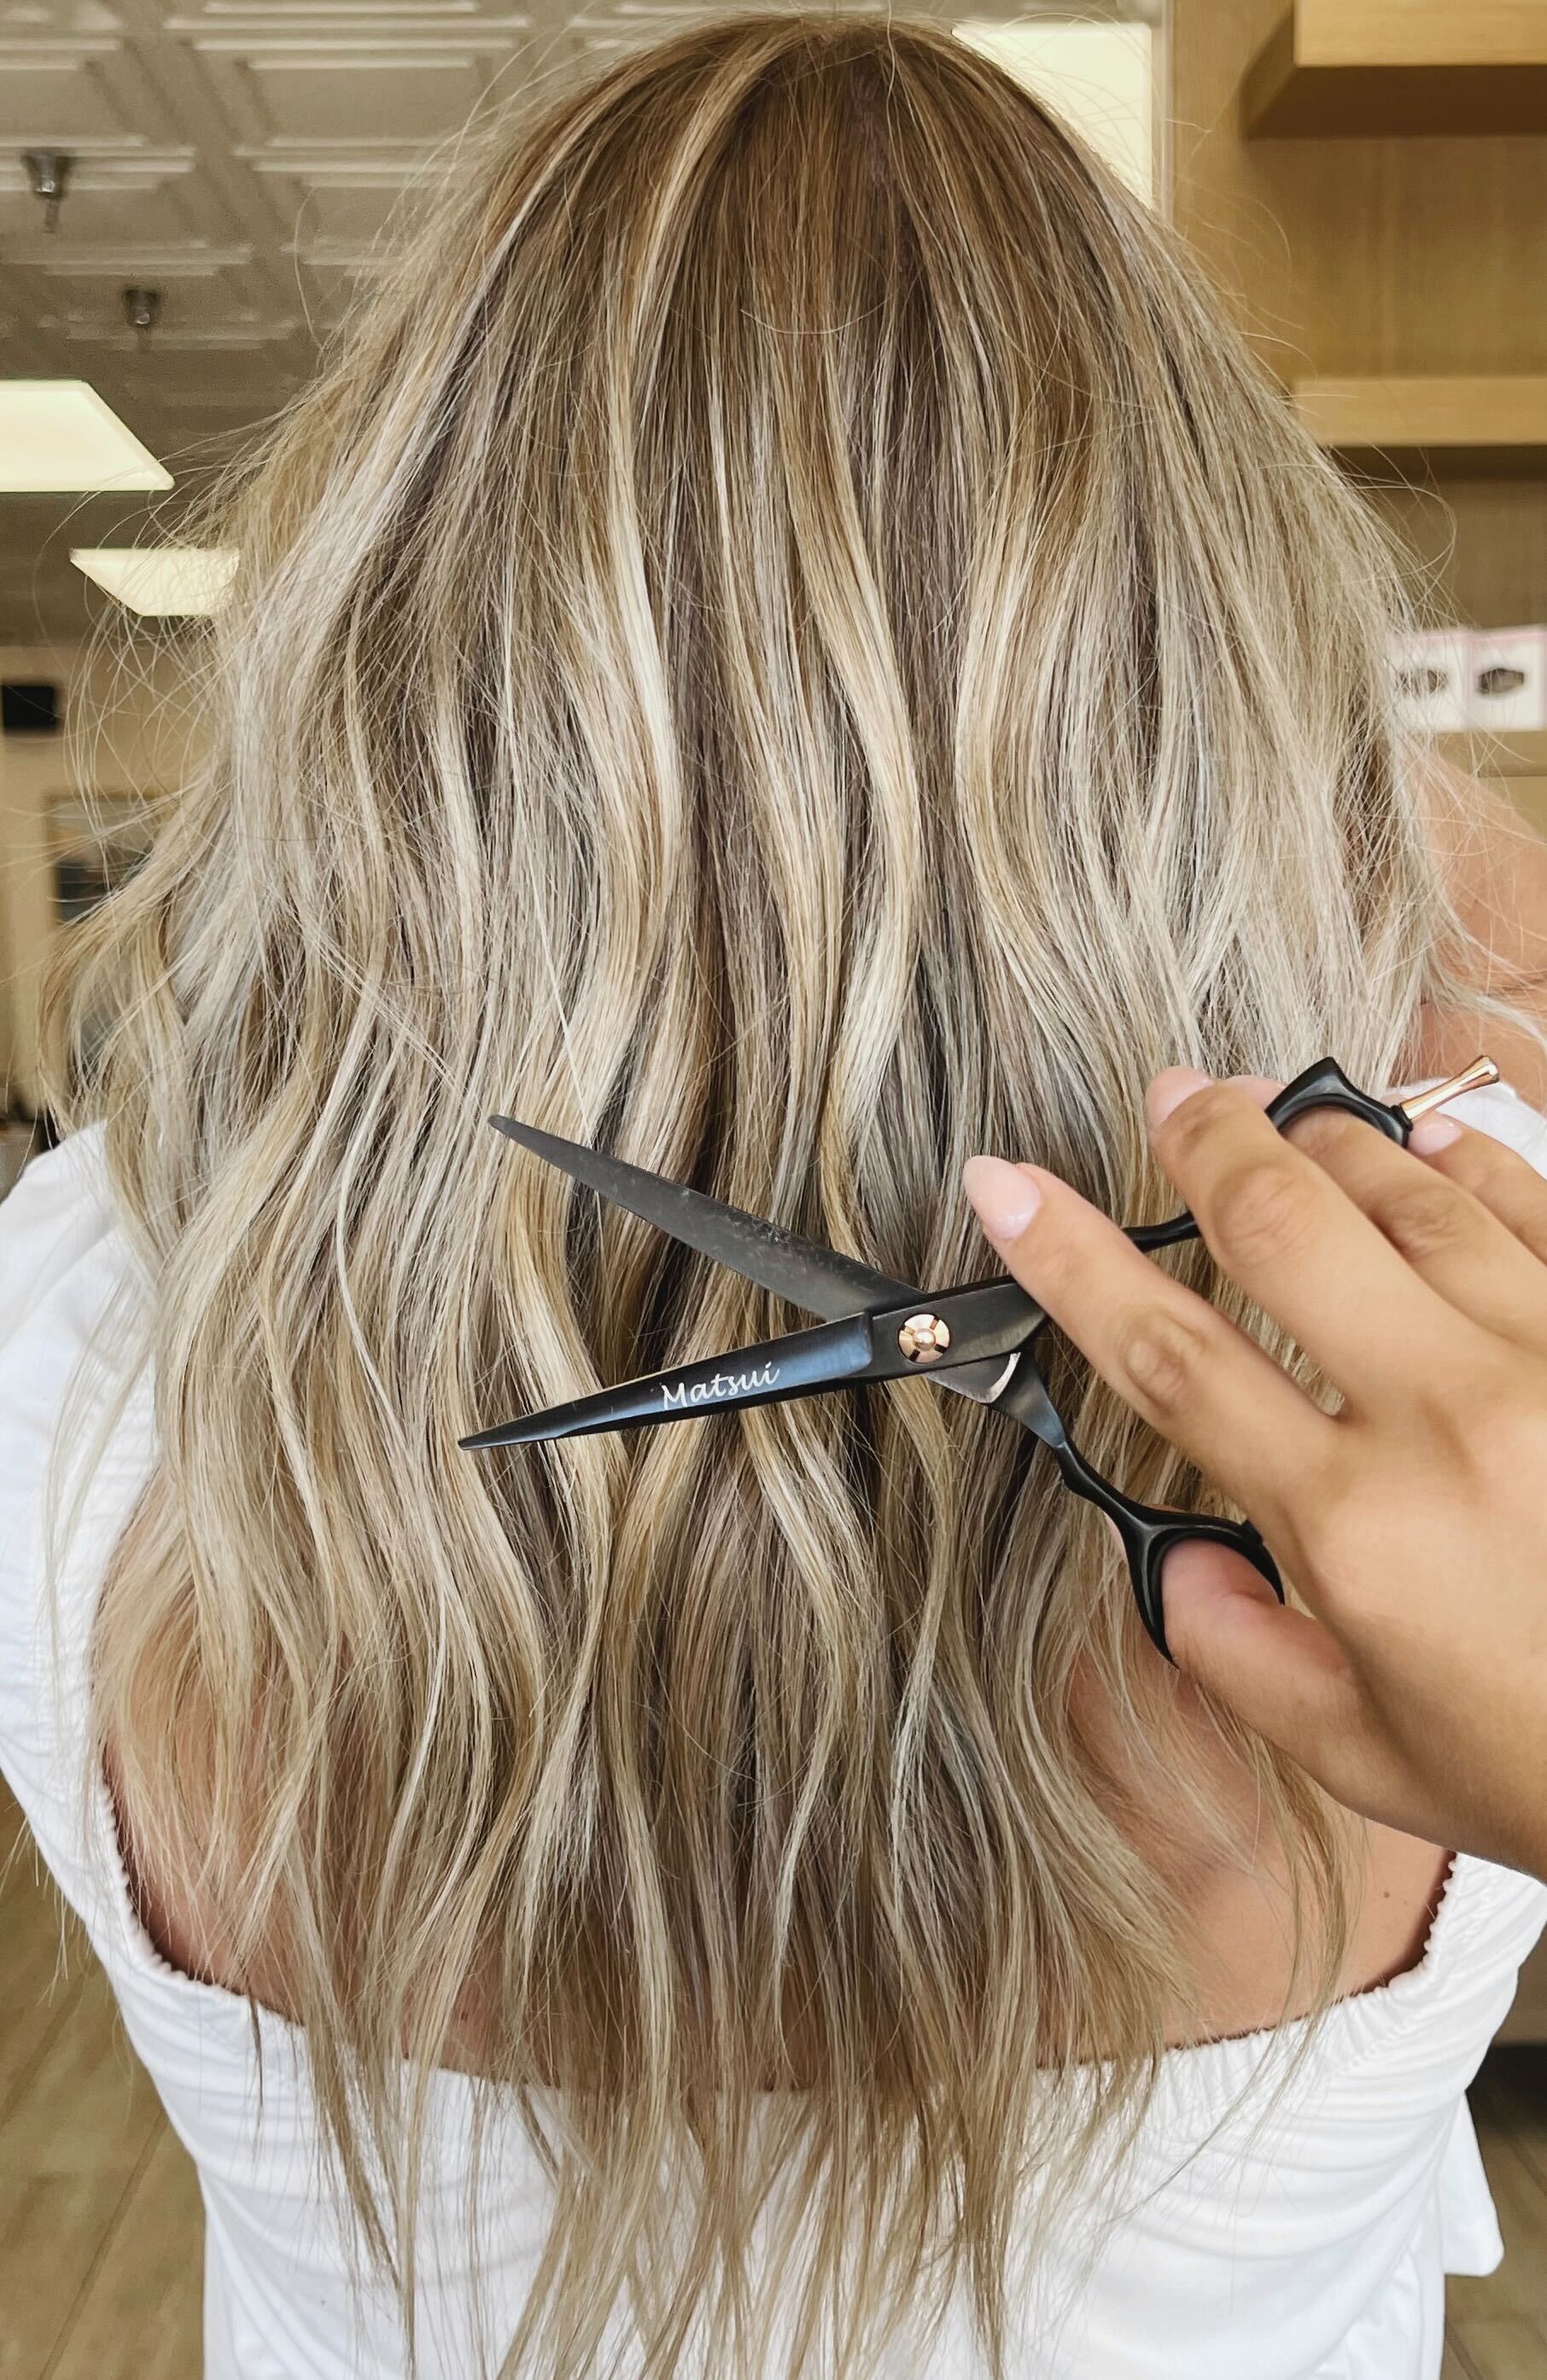 How to hold hairdressing scissors like a professional